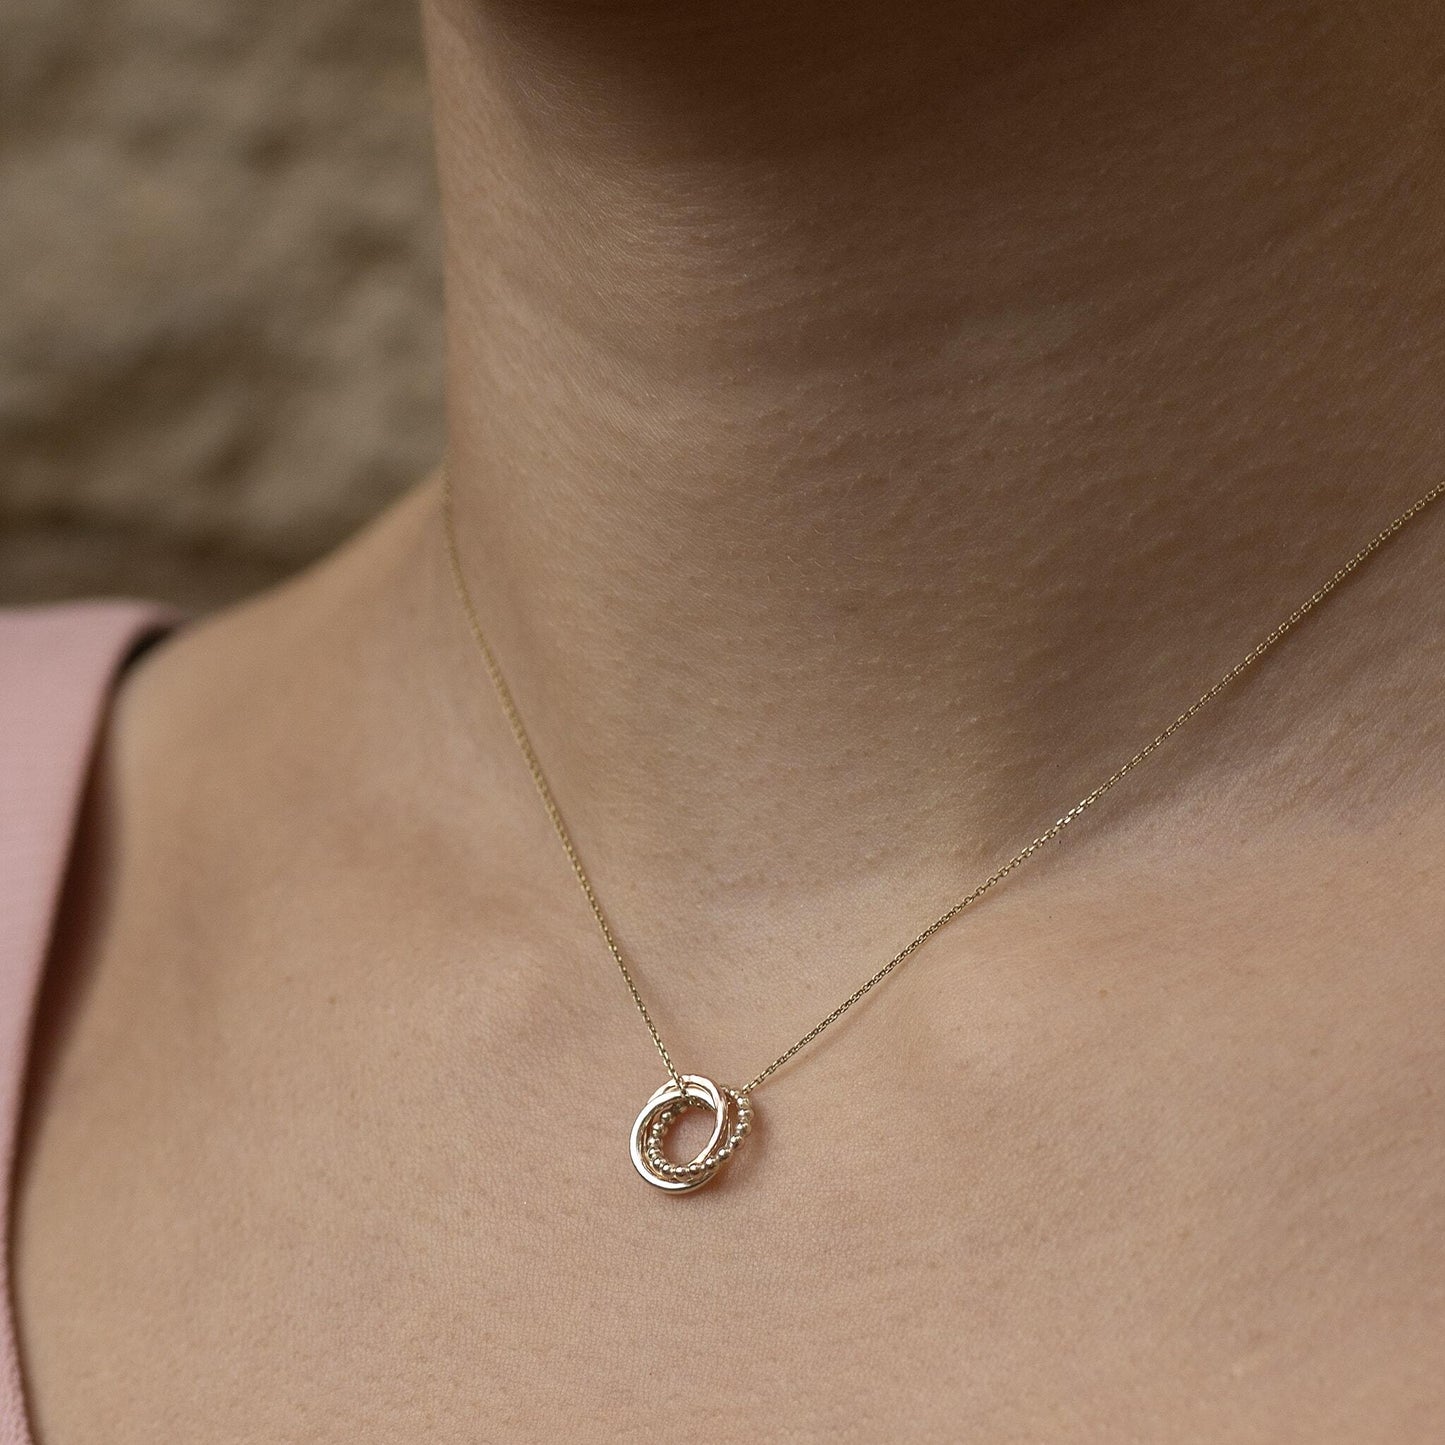 Tiny 9kt Gold Love Knot Necklace - 3 Links for 3 Siblings - Recycled White Gold - Rose Gold - Yellow Gold